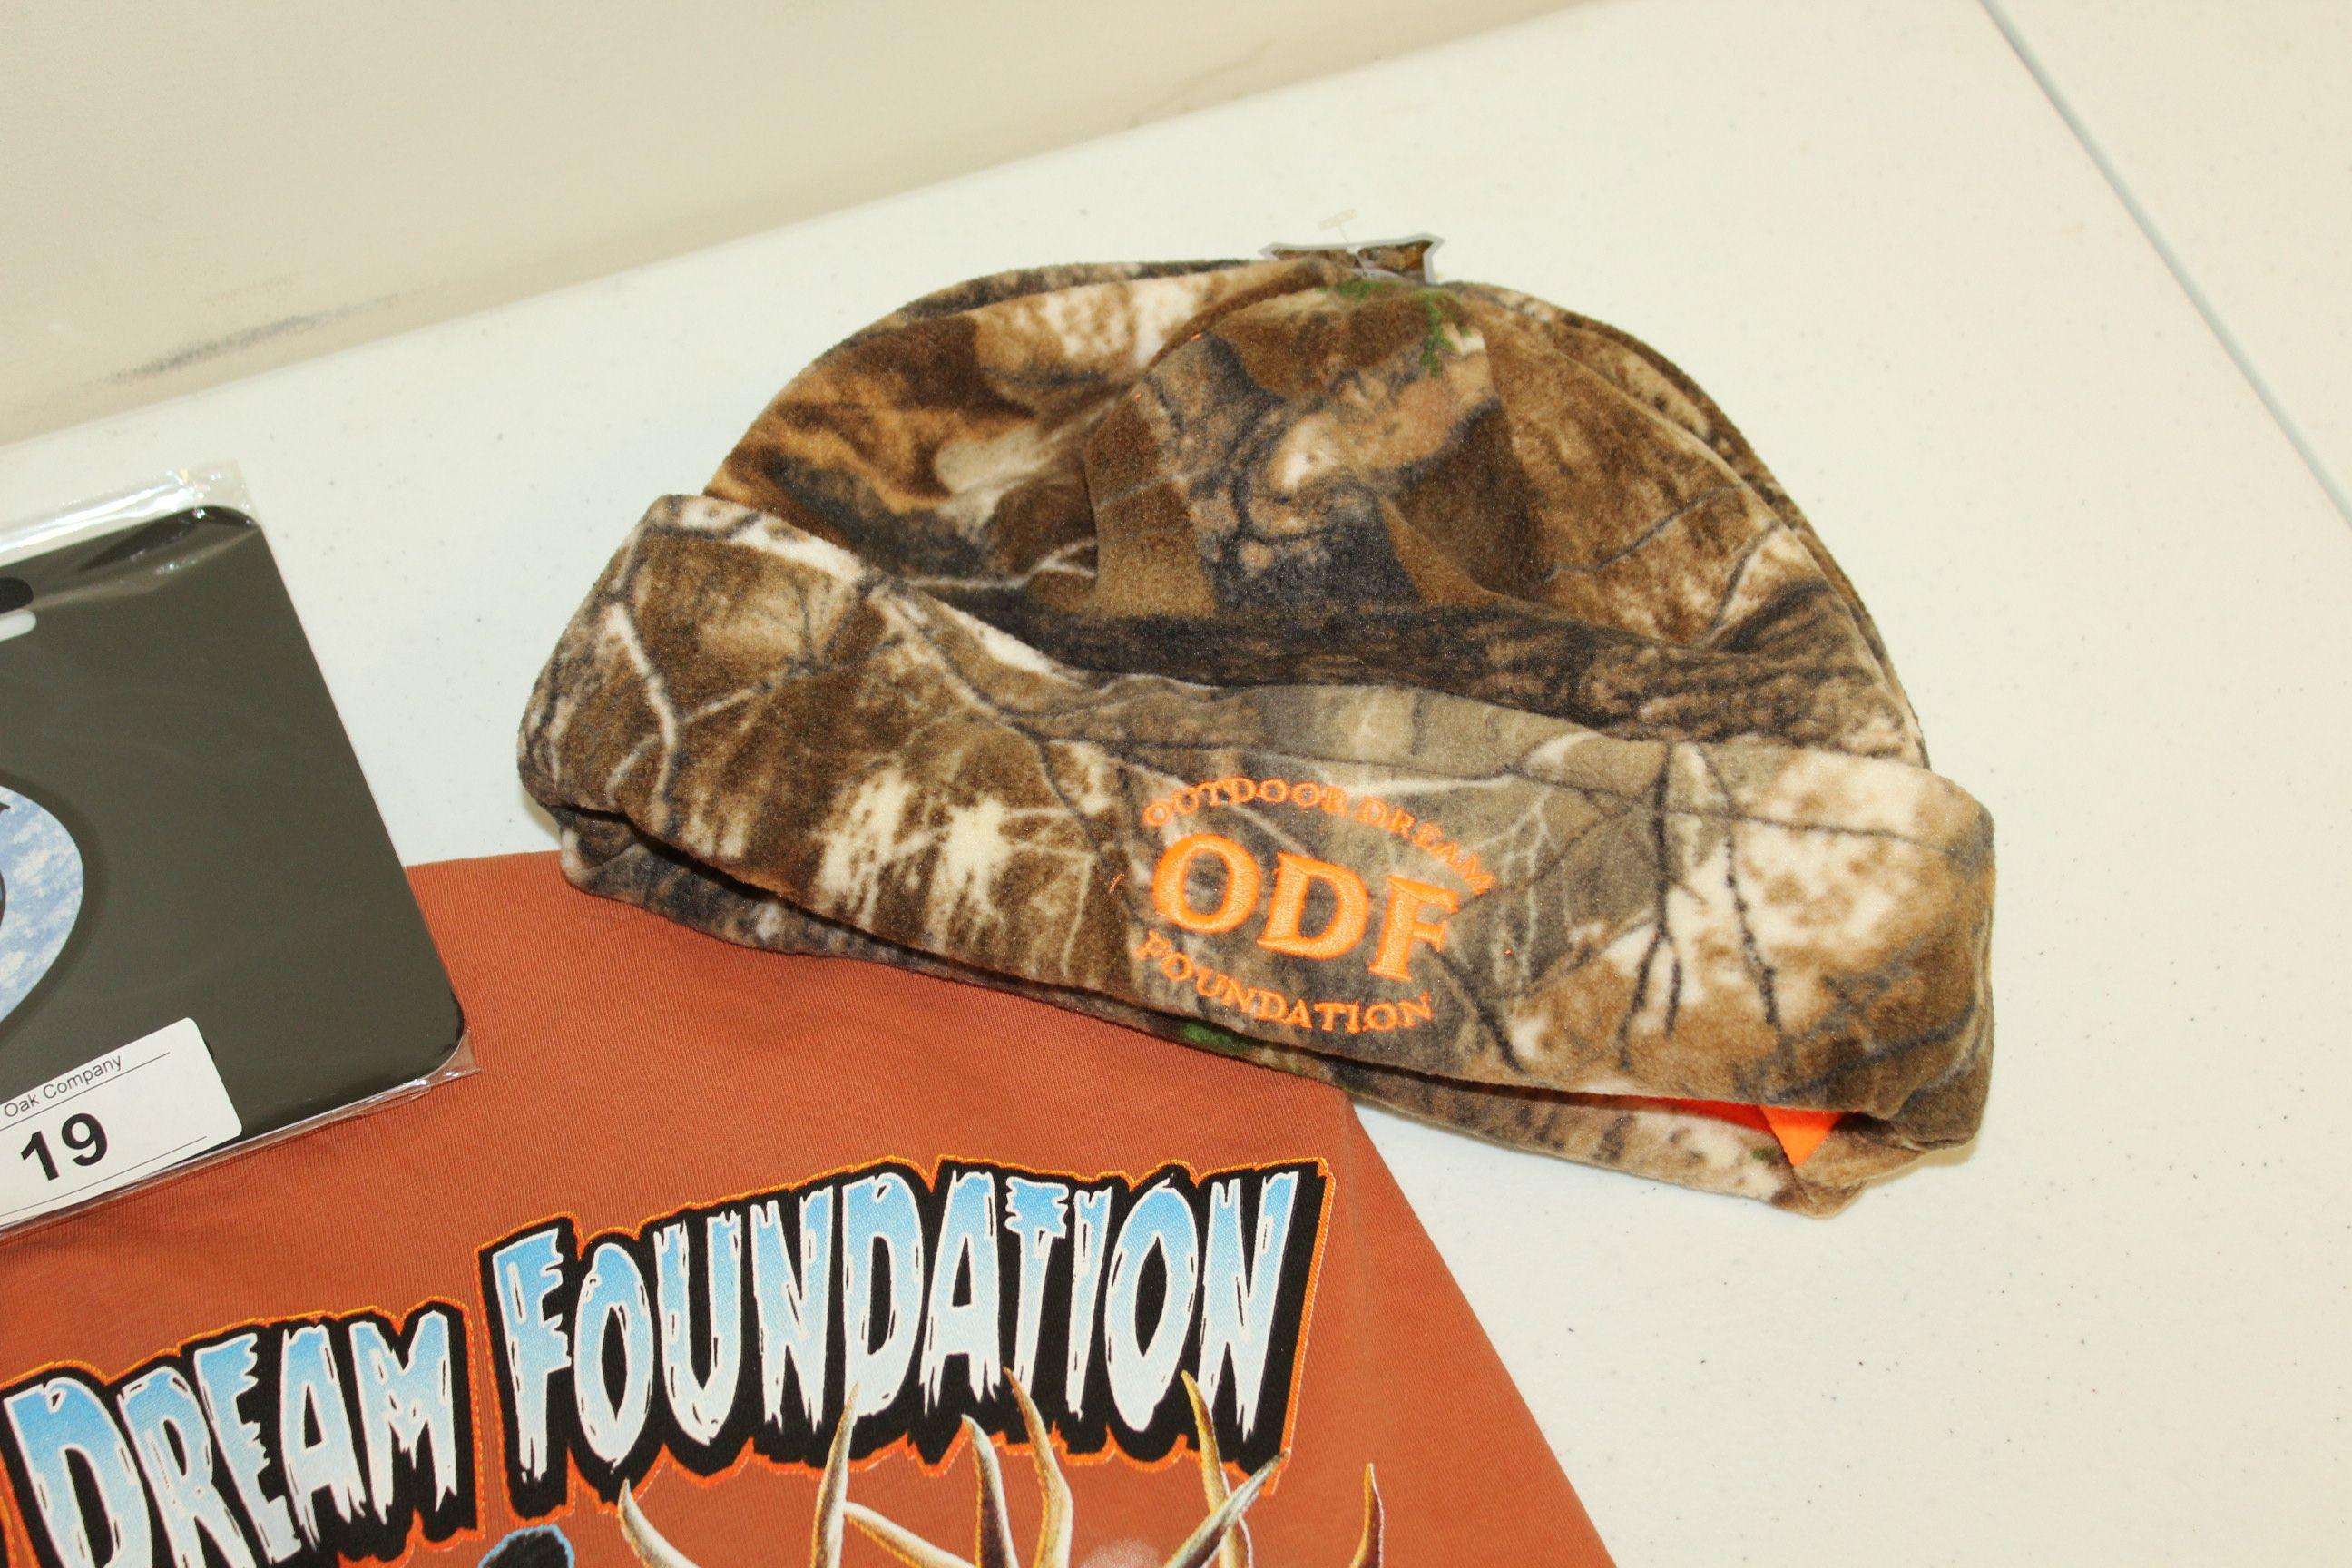 The Outdoor Dream Foundation XL T-Shirt, Hat, Cap and Car Tag!